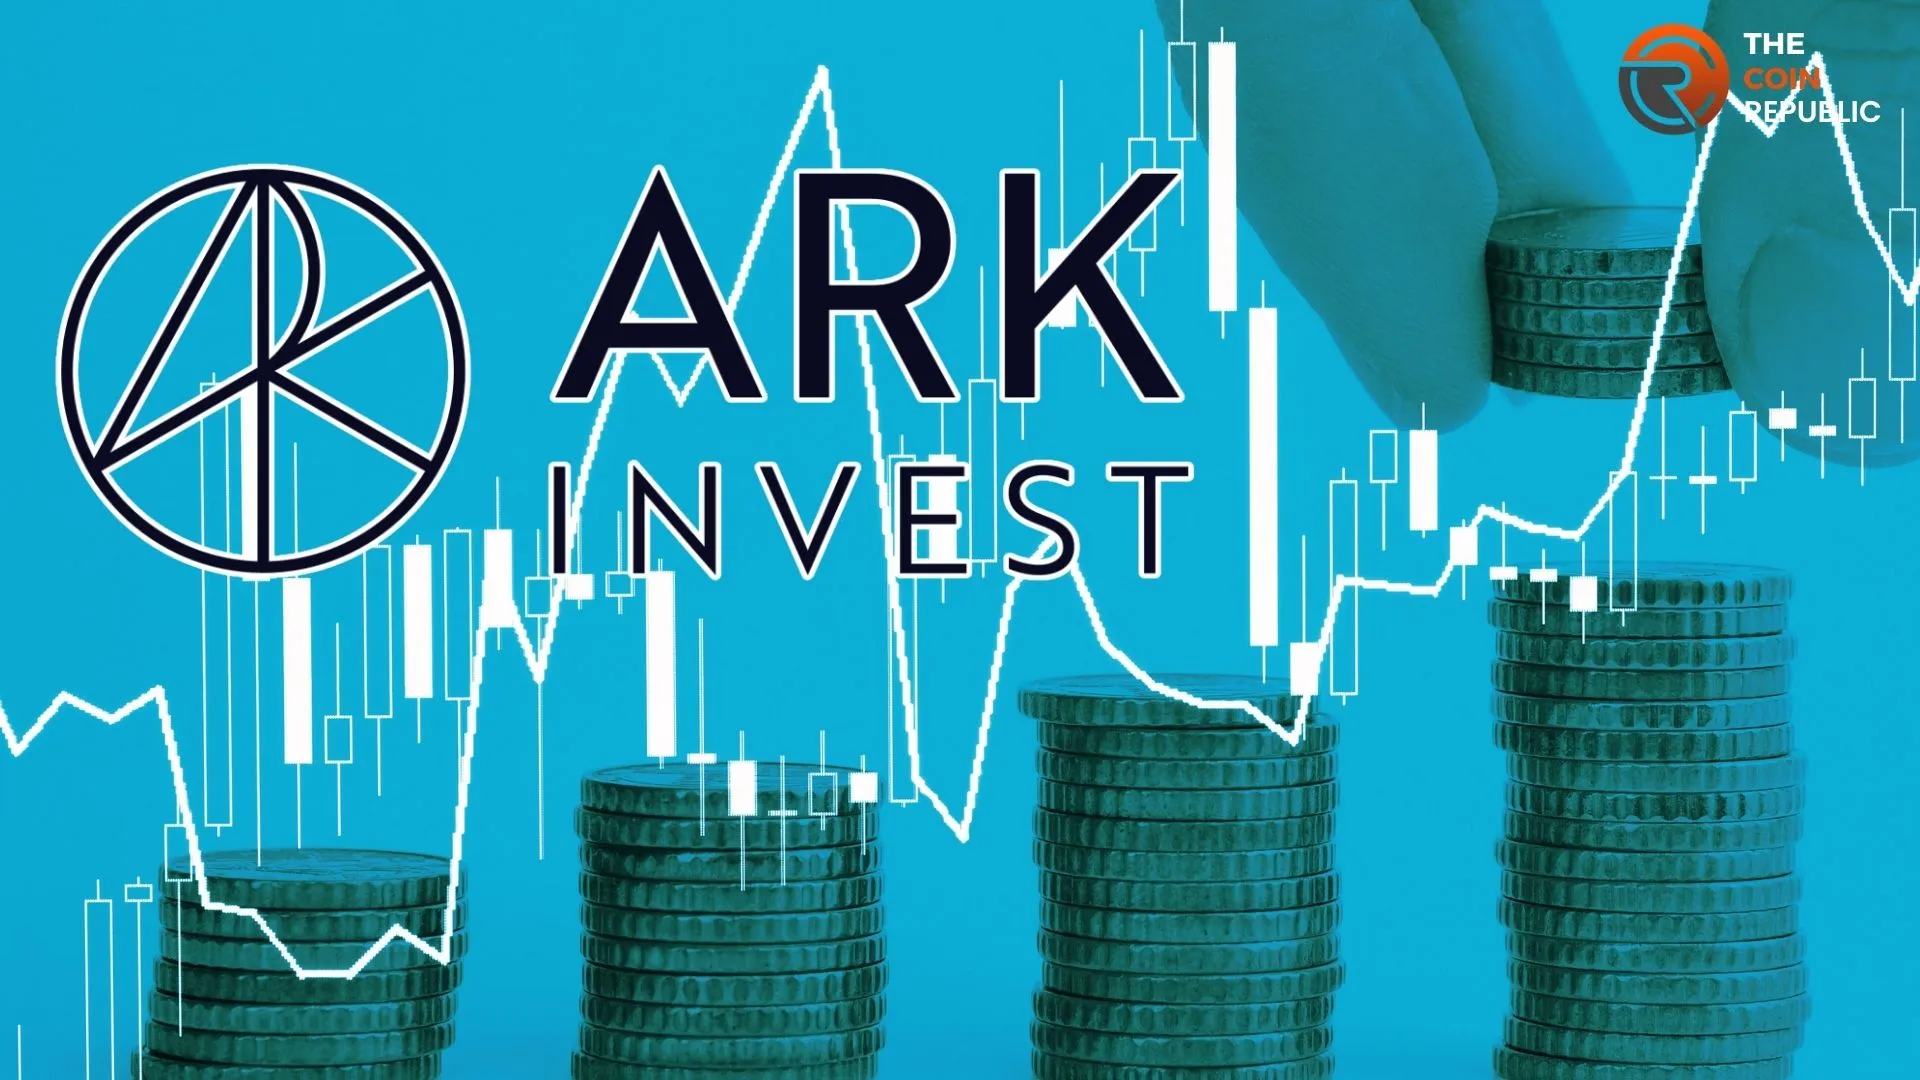 Top 5 Investments of Ark Invest That Will Reap Great Returns